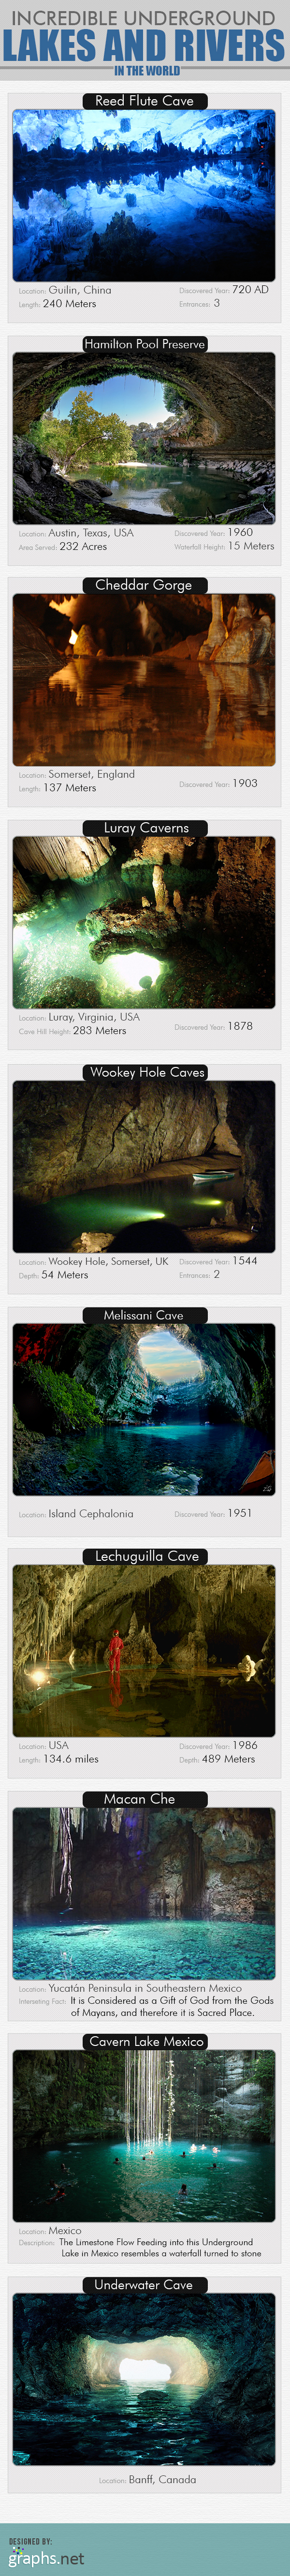 Incredible Underground Lakes and Rivers in the World